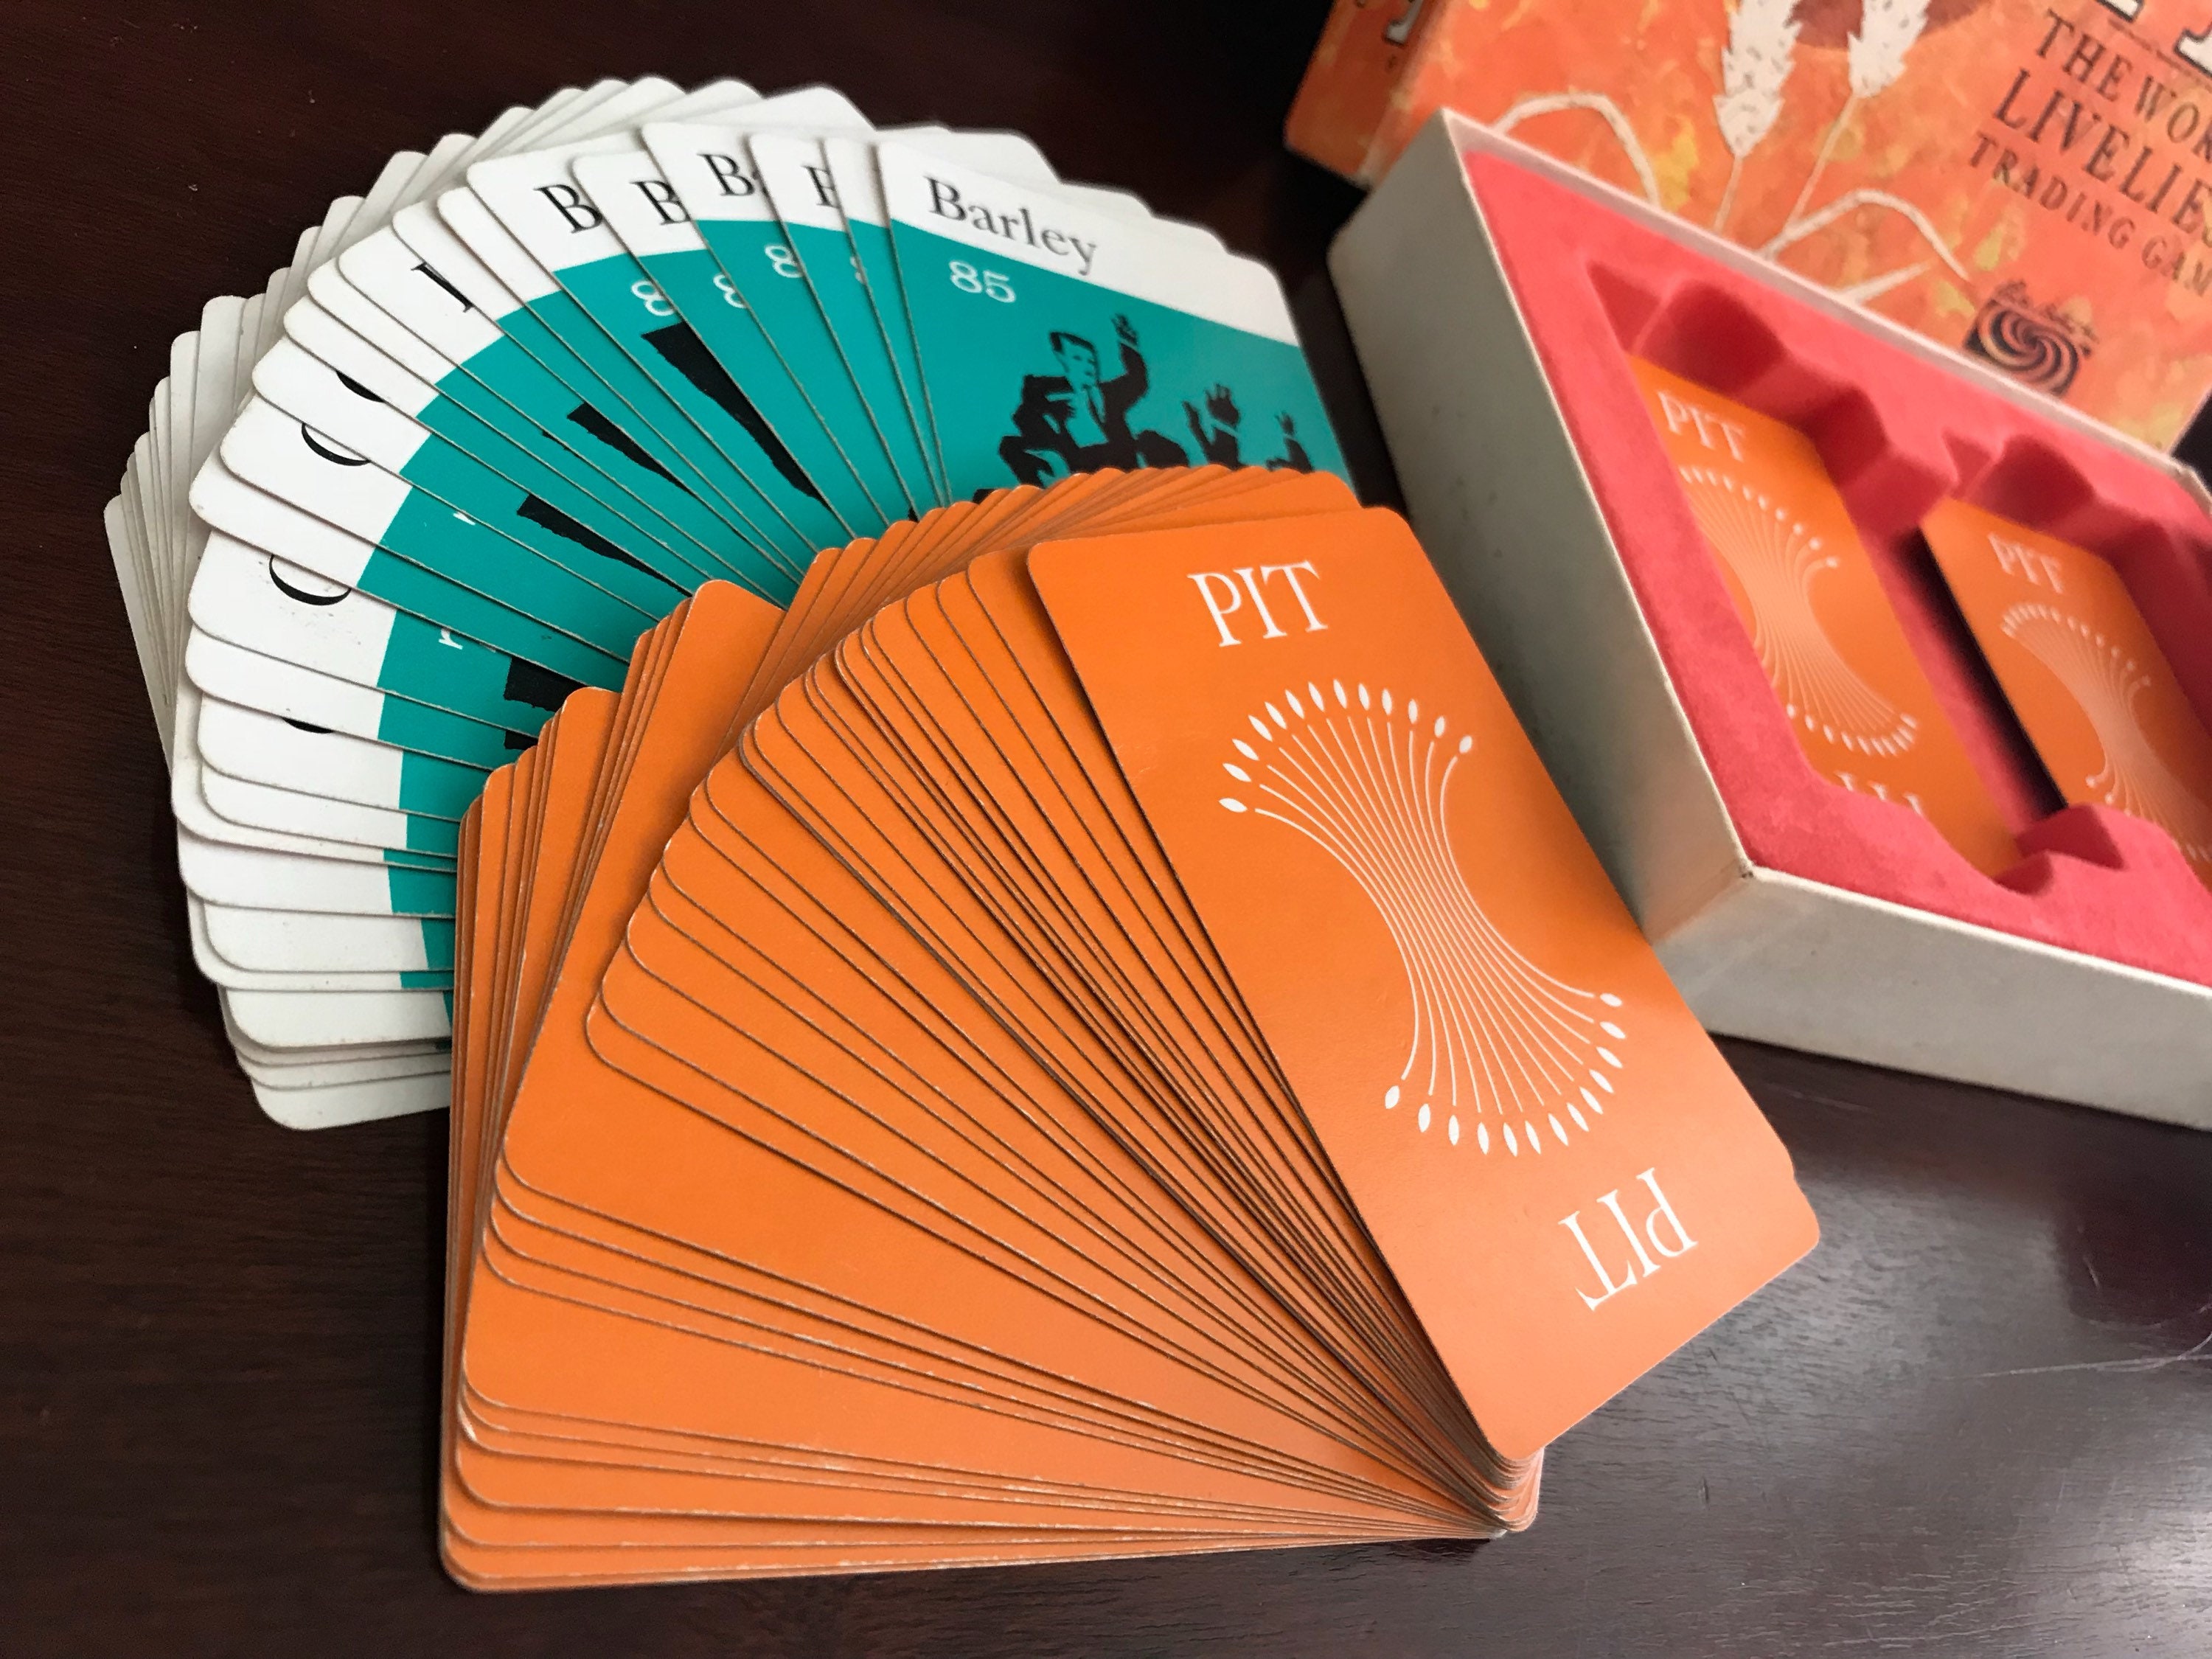 Vintage Pit Game, Card game, 1960s Pit Game, Complete Game of Pit, Parker Brothers Card Game ...